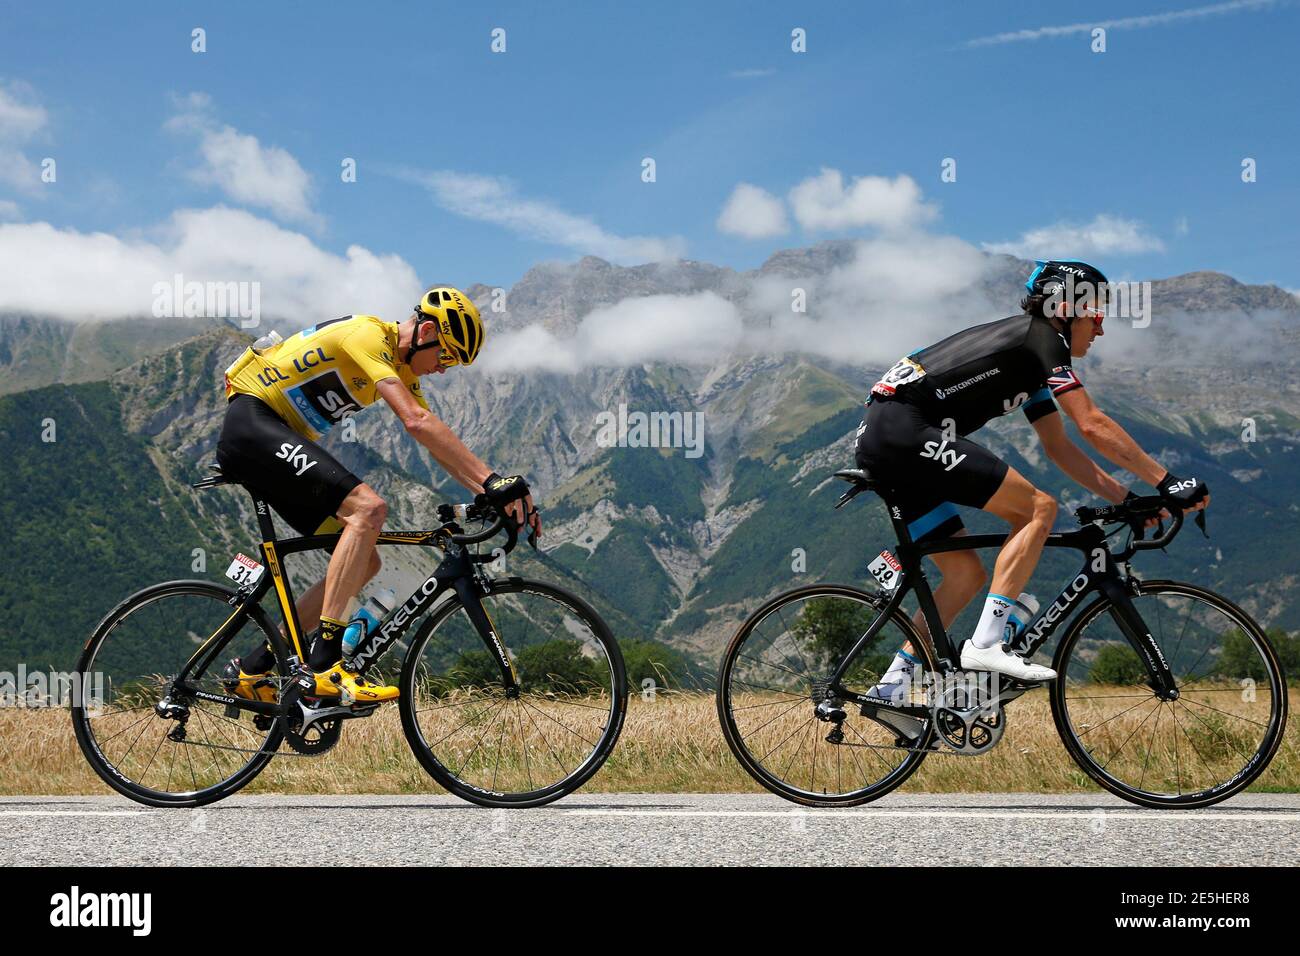 Team Sky riders Geraint Thomas of Britain and Chris Froome of Britain (L),  race leader's yellow jersey, cycle during the 186.5-km (115.88 miles) 18th  stage of the 102nd Tour de France cycling